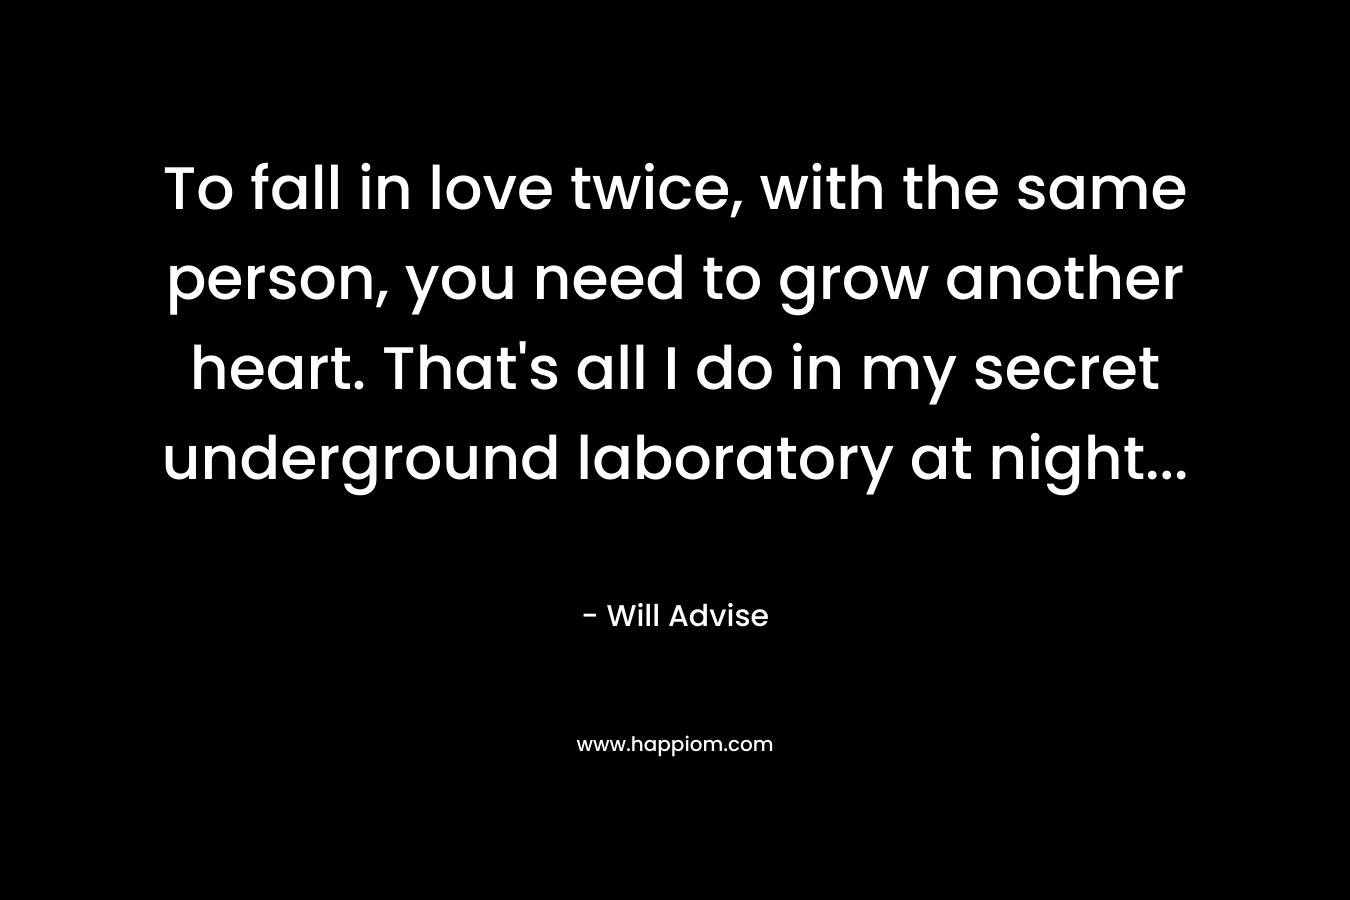 To fall in love twice, with the same person, you need to grow another heart. That's all I do in my secret underground laboratory at night...